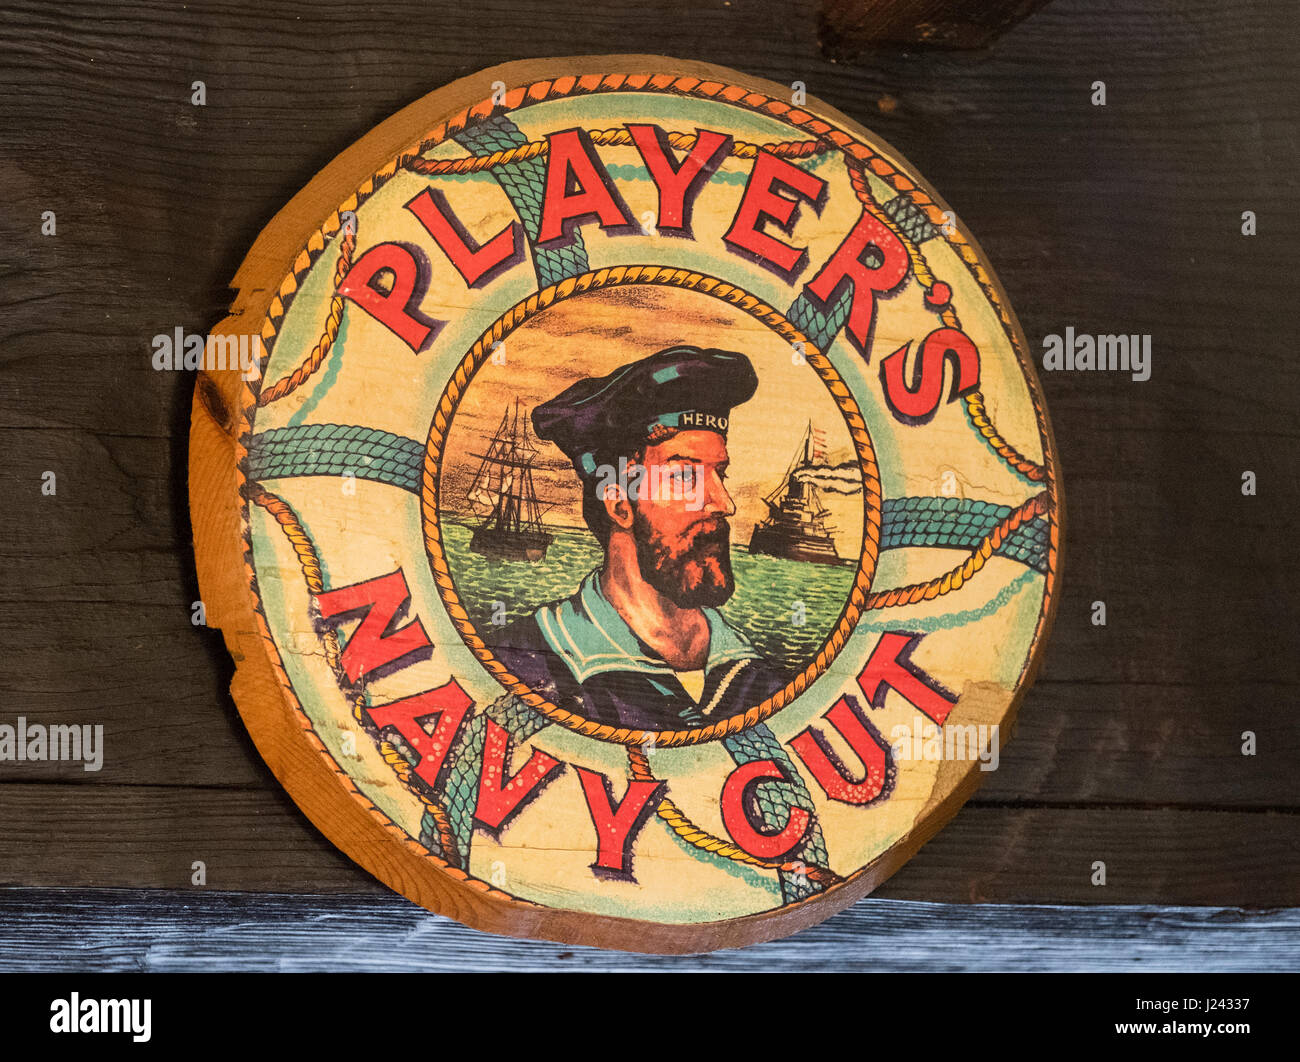 Players Navy Cut advertisement on a wooden beam. Stock Photo